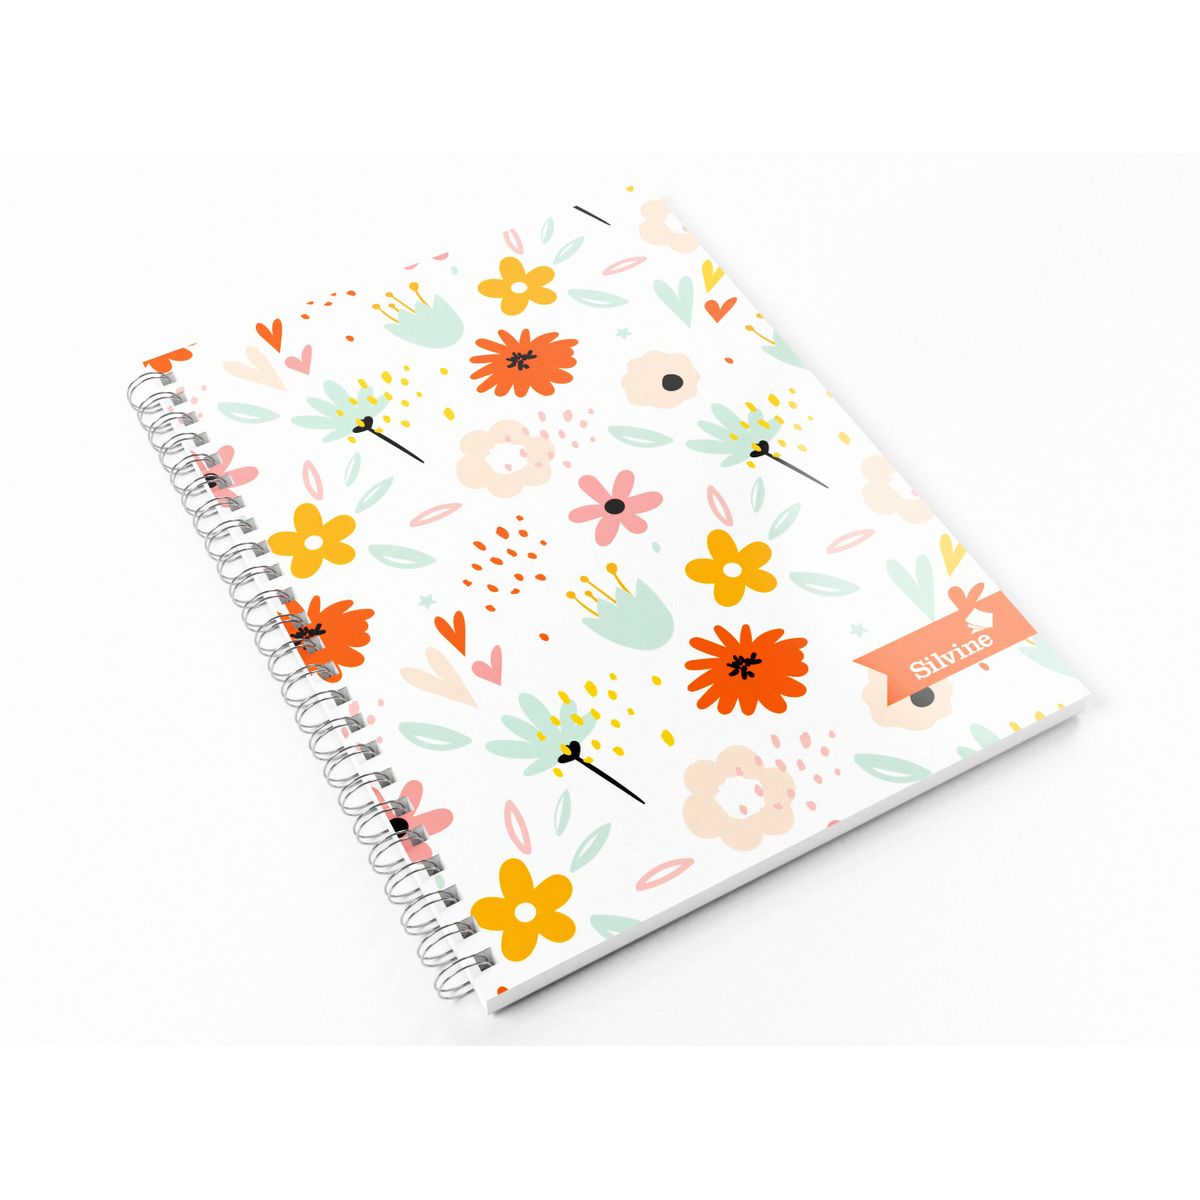 Silvine A5 Twinwire Marlene West Floral White Notebook 160 Pages RRP £3.86 CLEARANCE XL £1.50